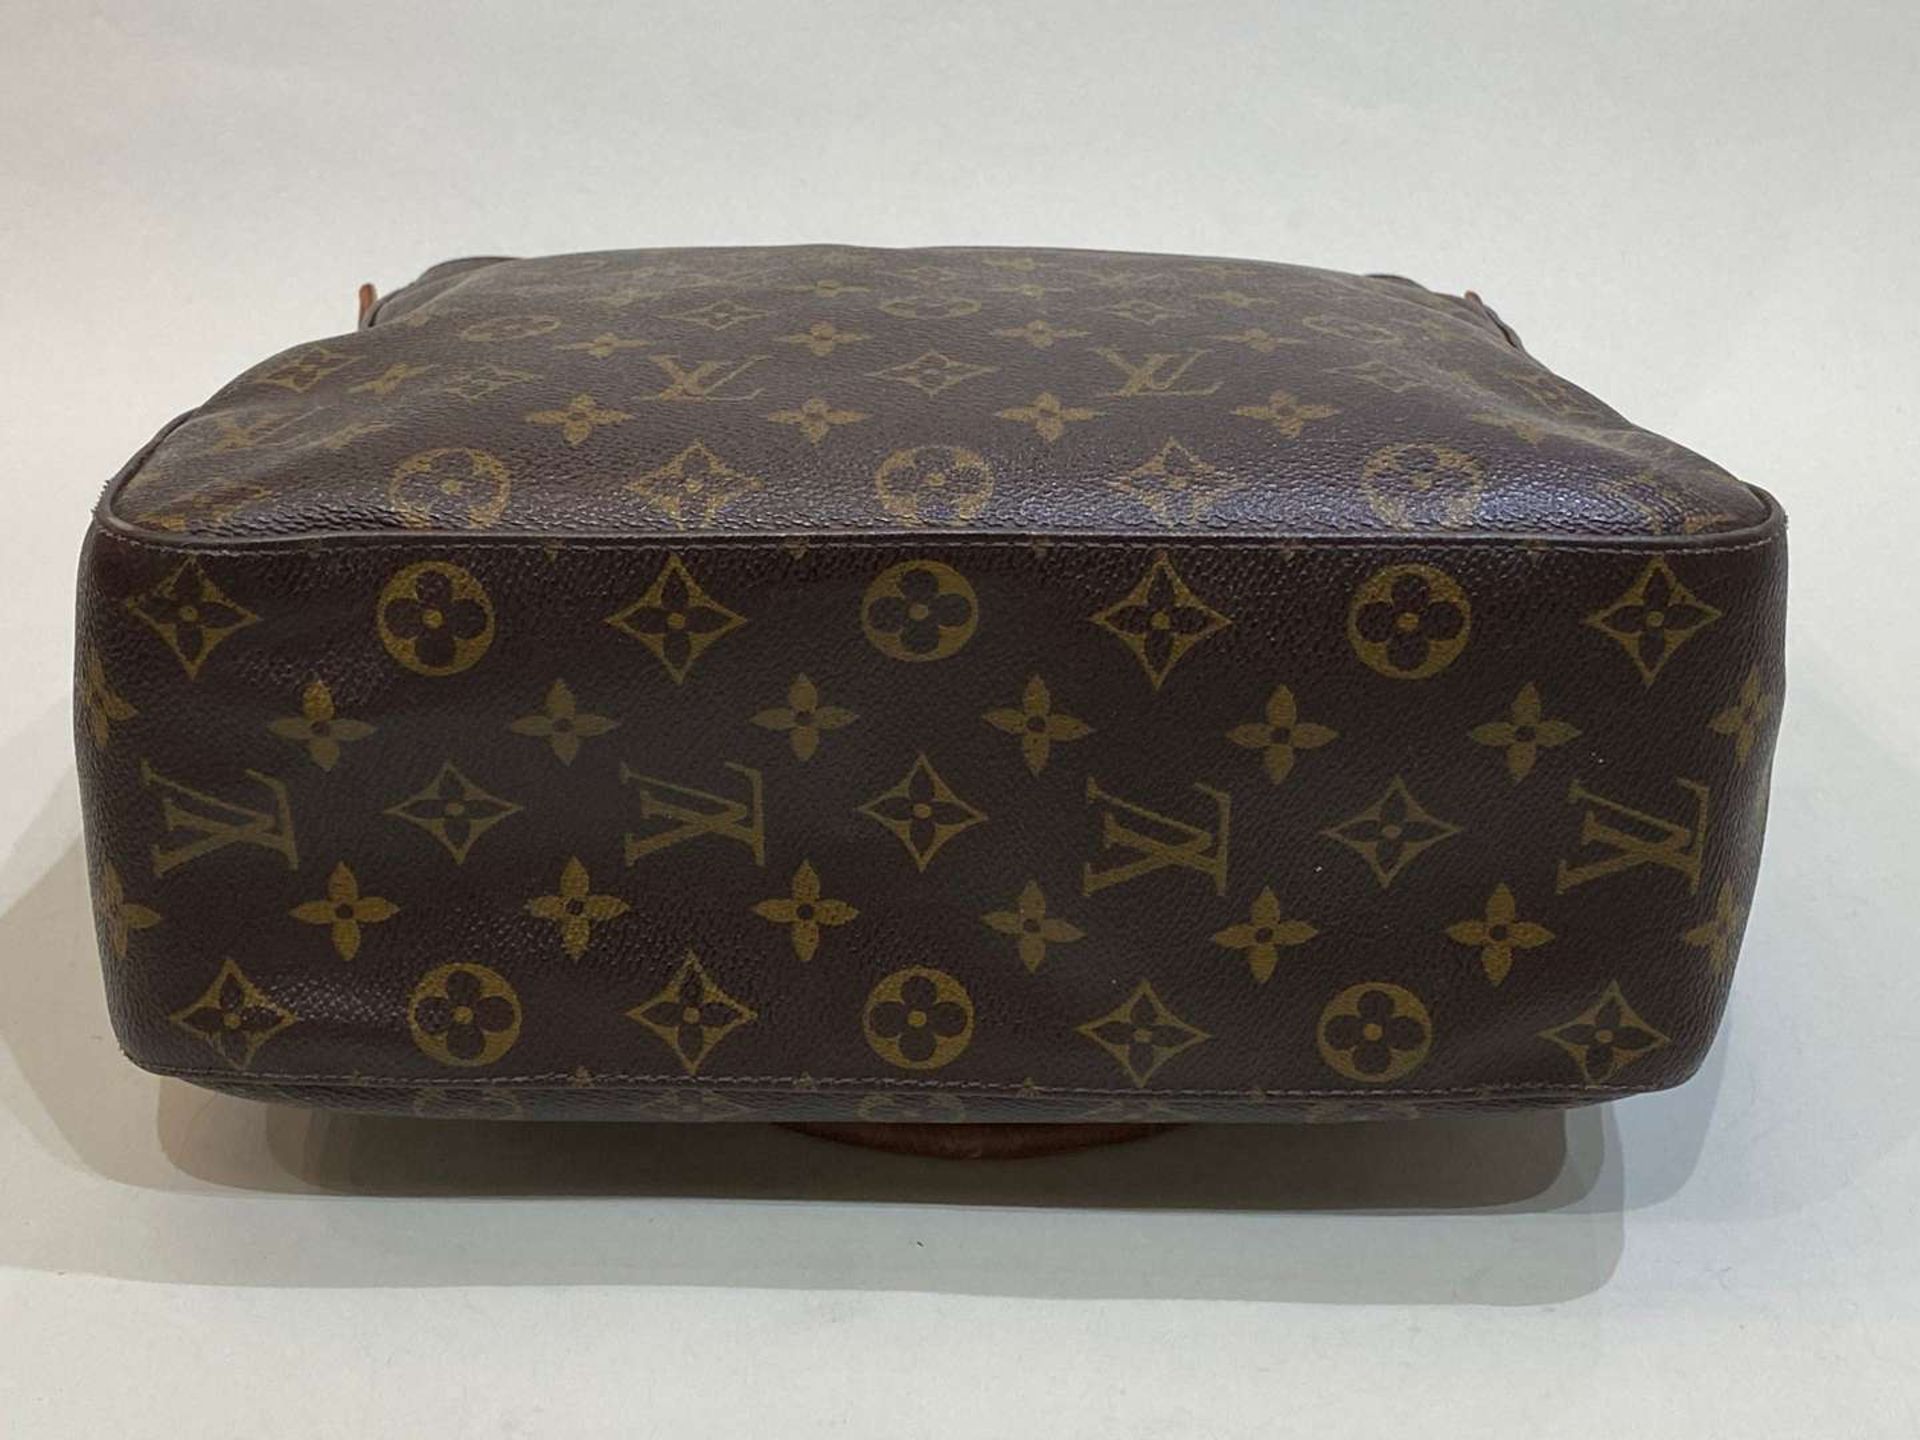 LOUIS VUITTON, Looping, tan stitched leather and monogrammed shoulder bag - Bild 7 aus 7